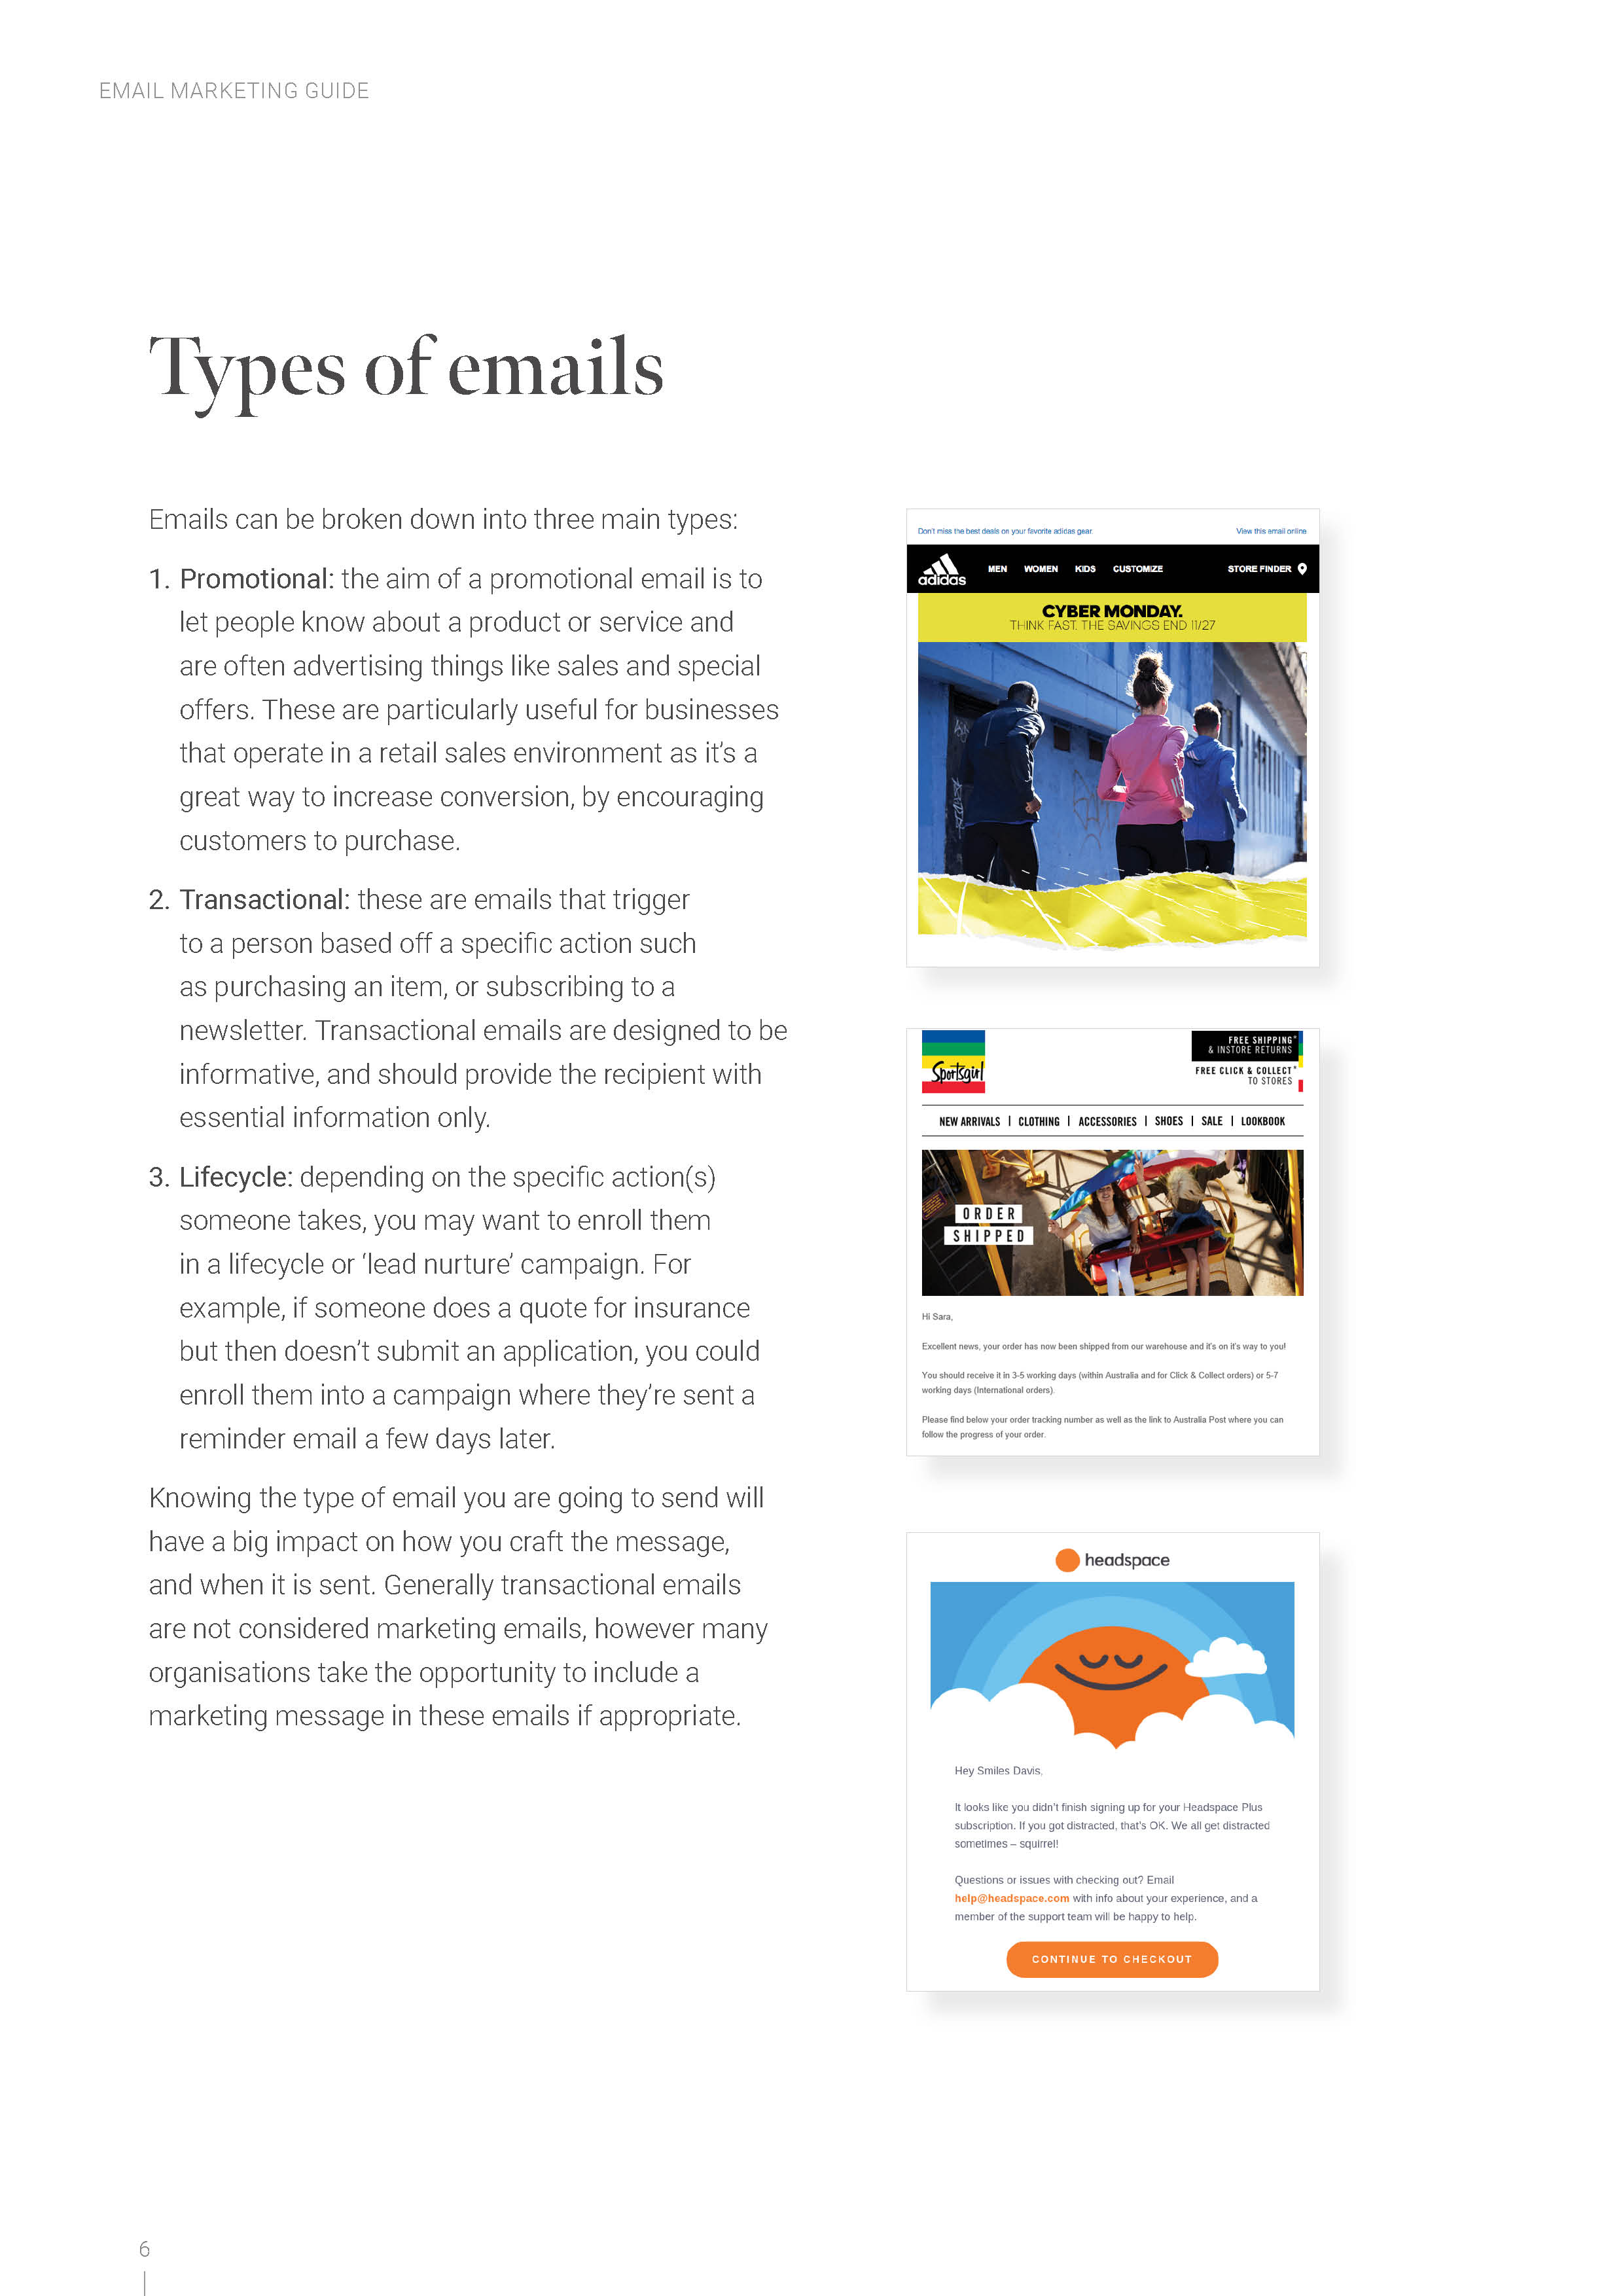 How to create marketing emails